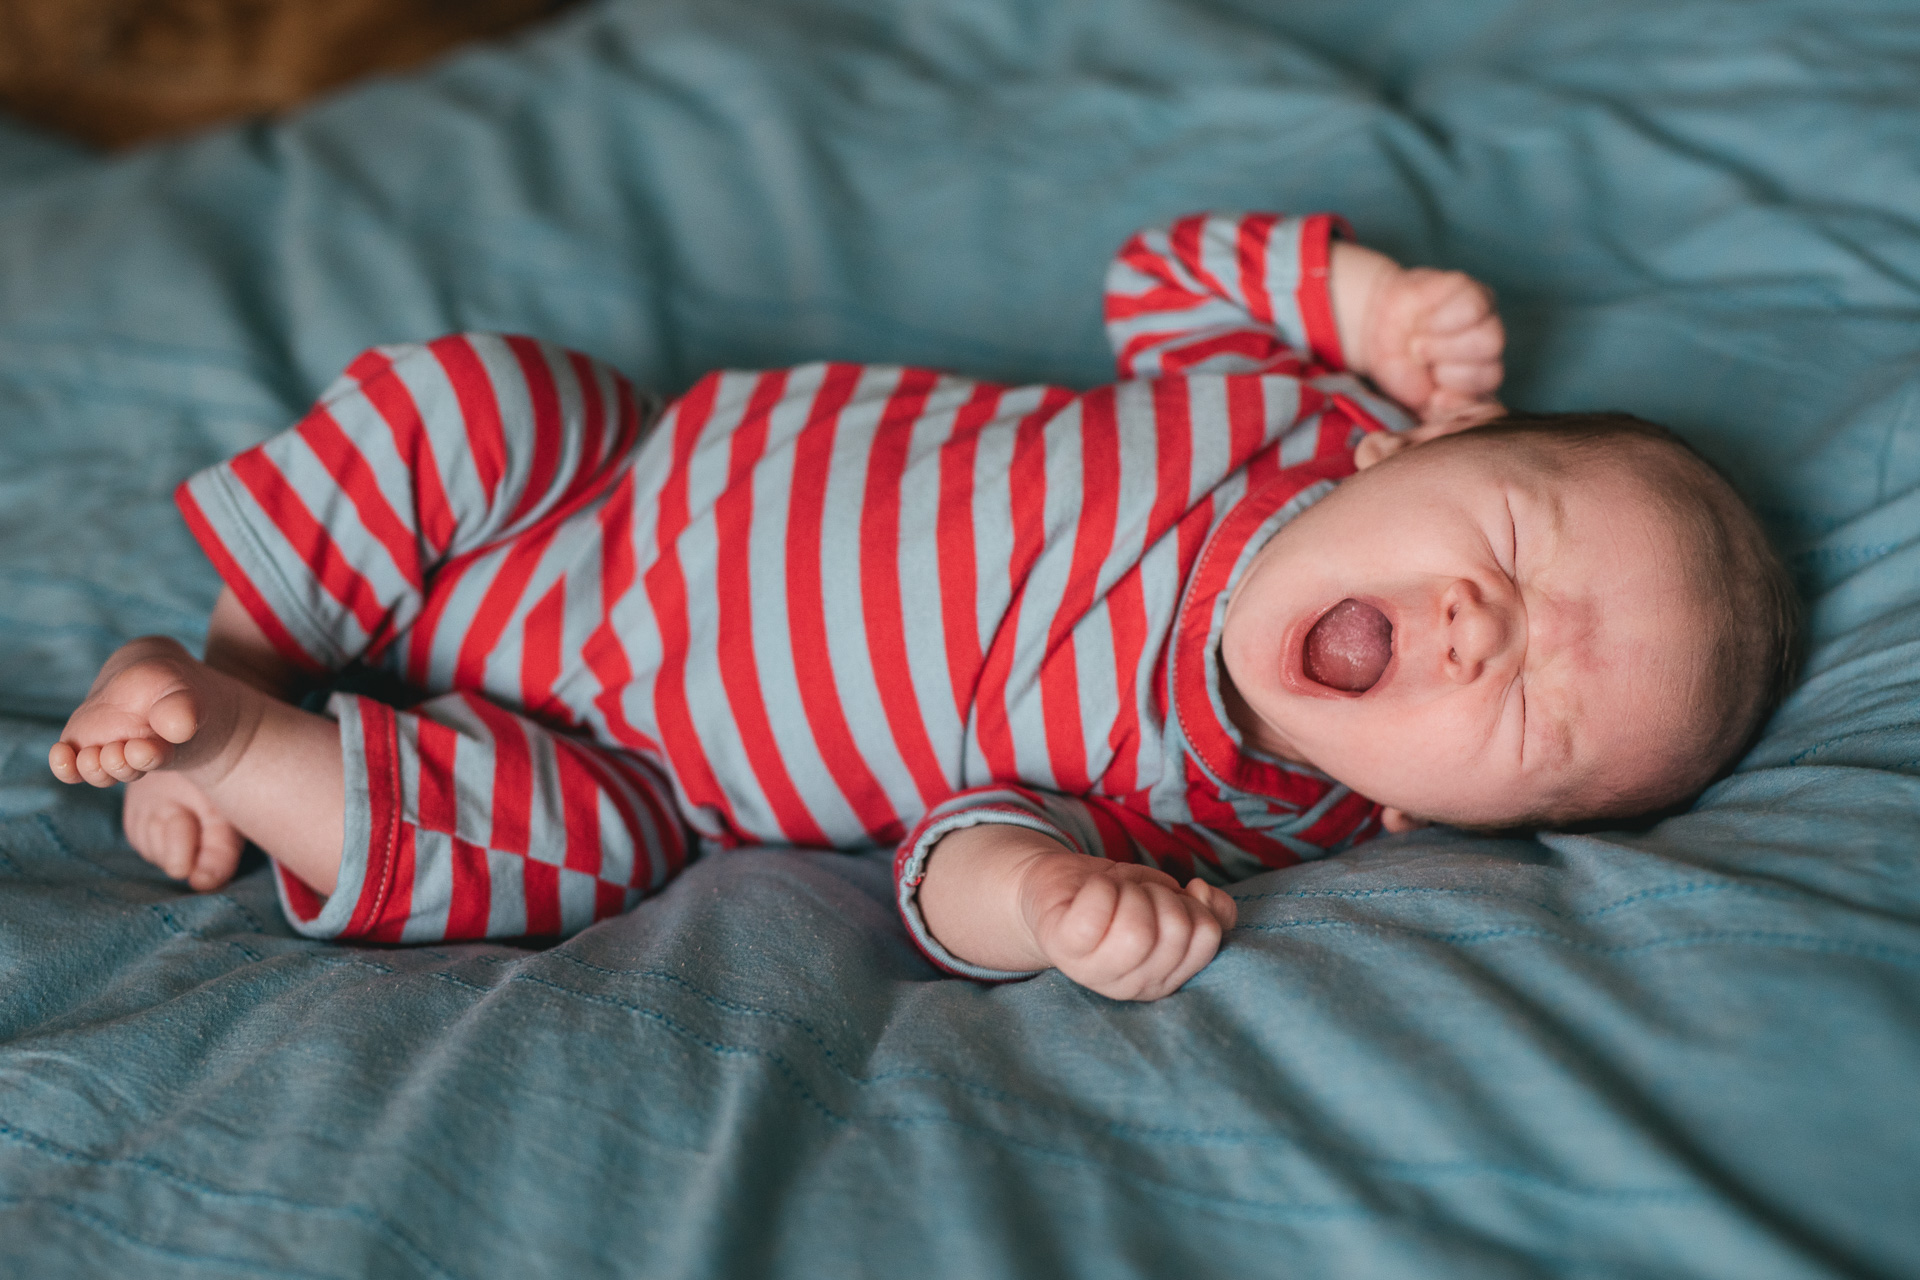 A baby in a stripey outfit, yawning